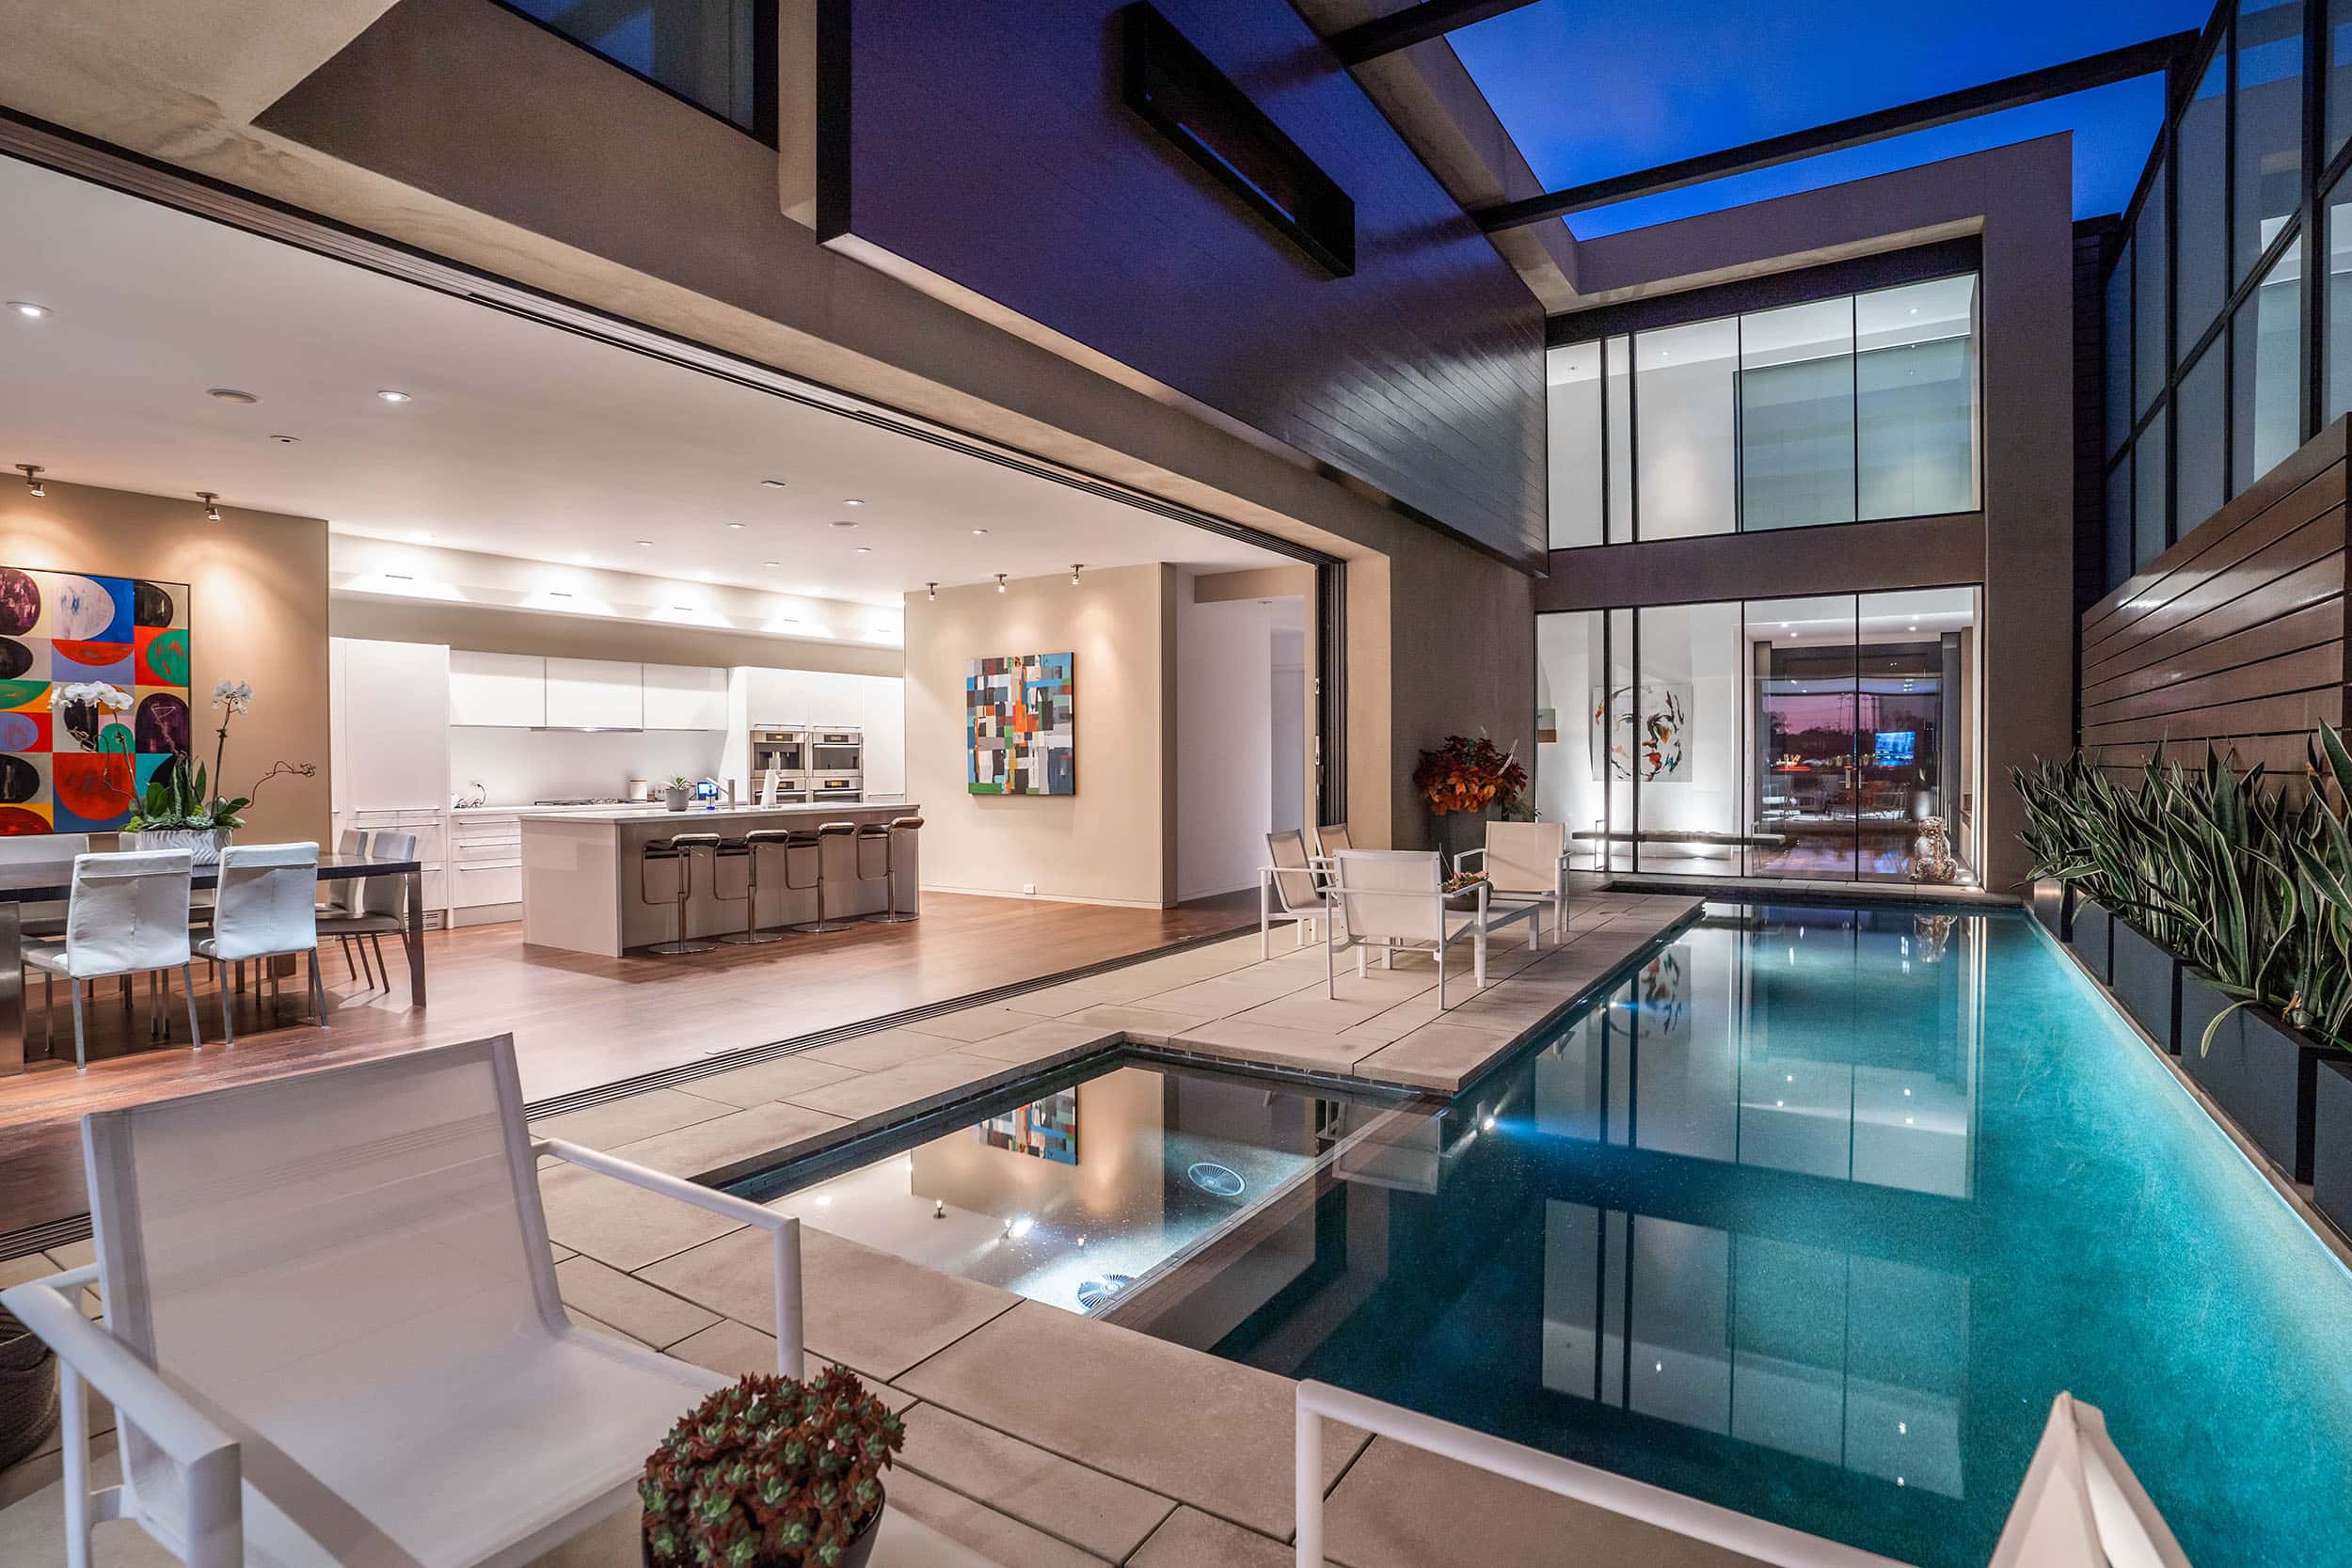 Interior Courtyard With Pool And Open Concept Living Space.